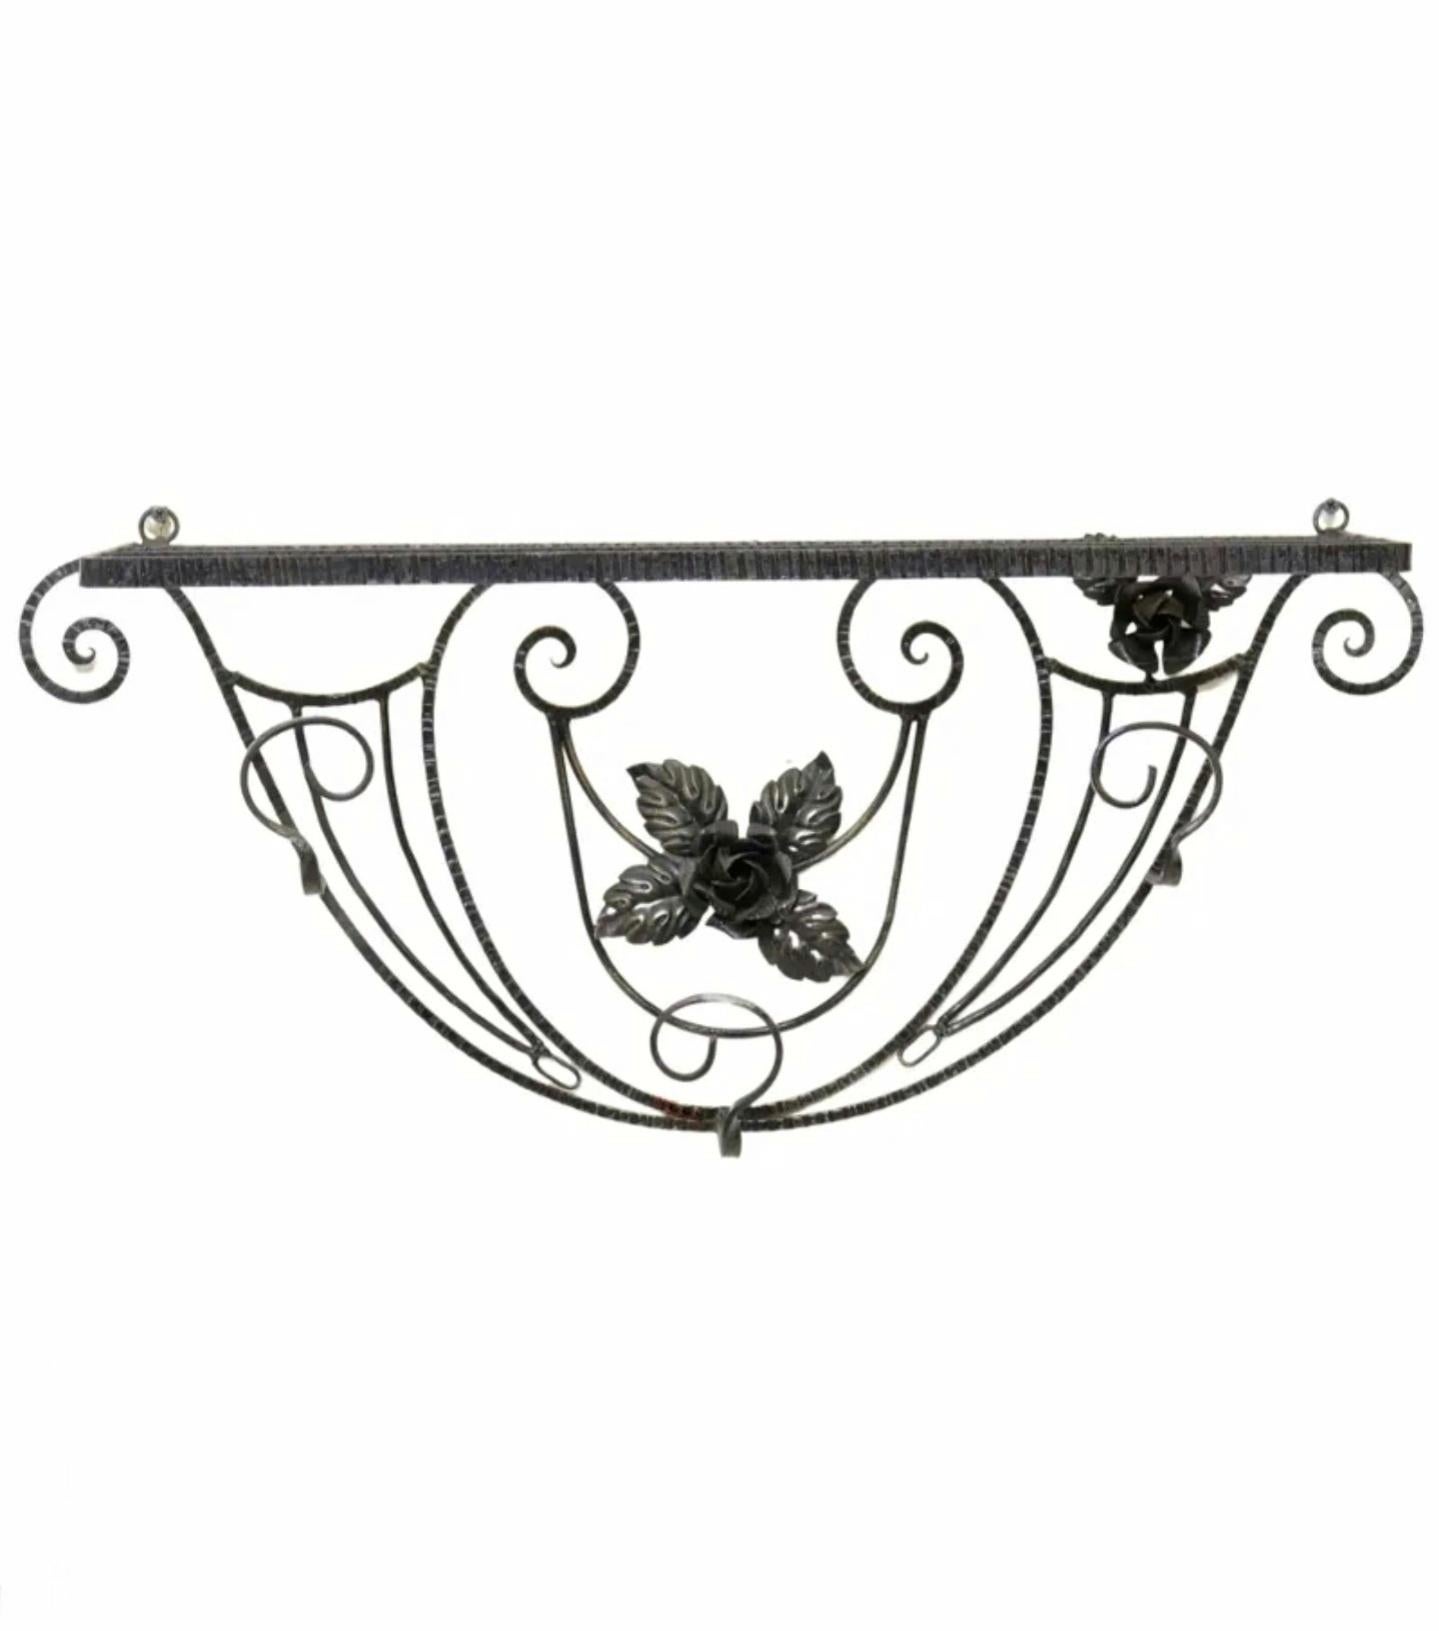 An original French Art Deco period black wrought iron wall hanging hall shelf (hat rack - coat hanger), in the manner of iconic Art Deco ironworker Edgar Brandt (French, 1880-1960)

France, circa late 1920s / early 1930s, hand forged ironwork,